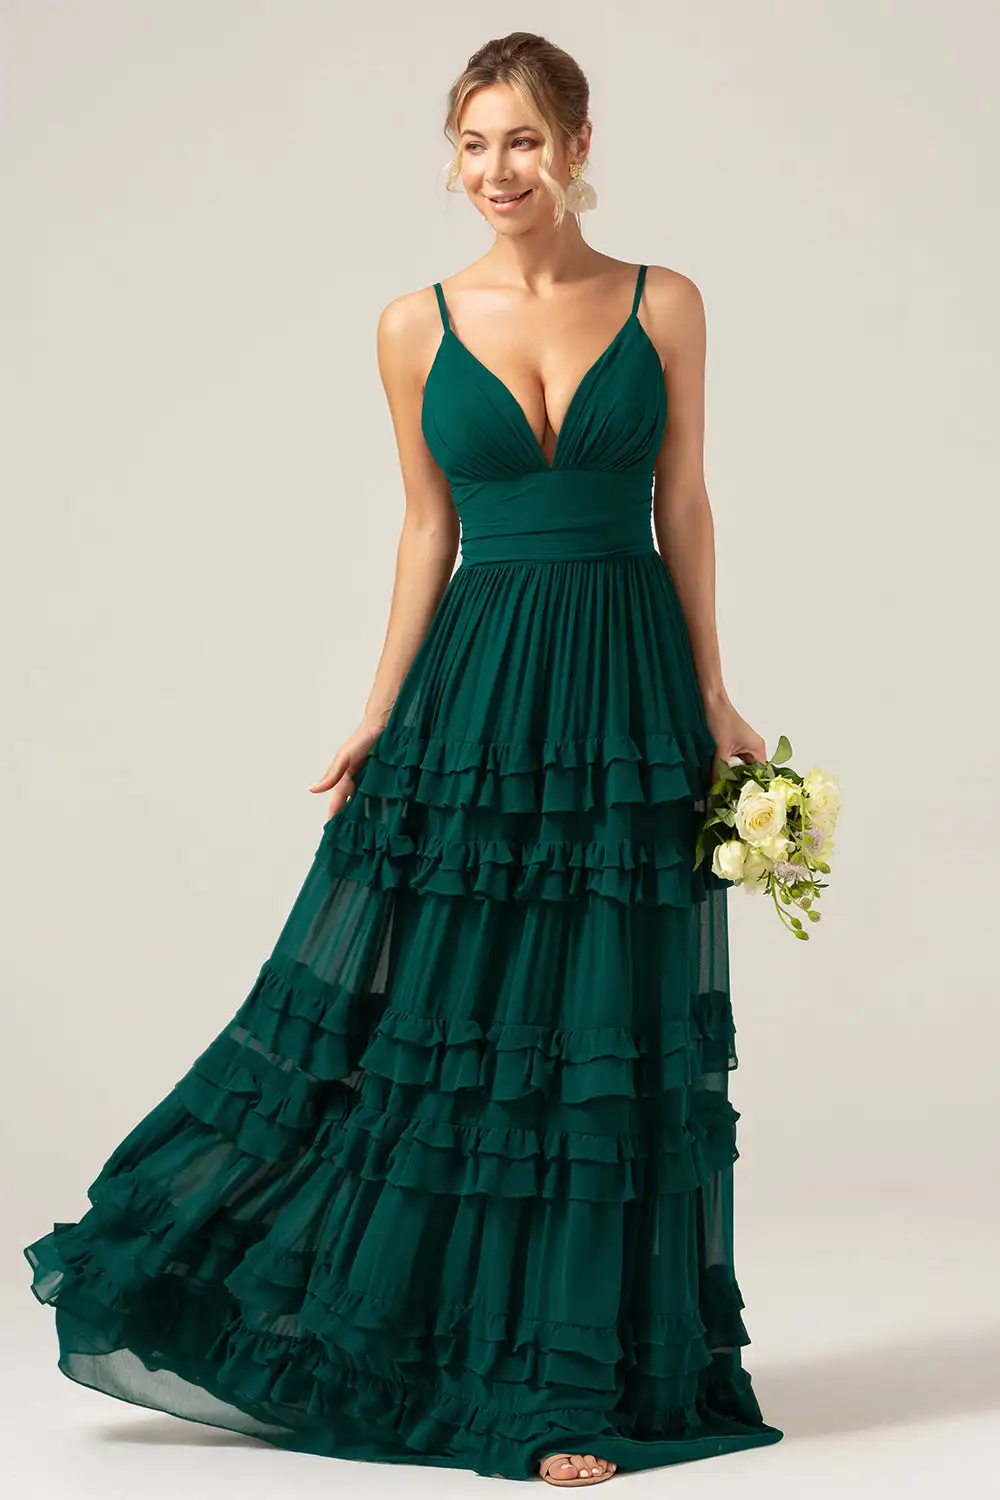 

A-Line Spaghetti Straps Tiered Pleated Long Chiffon Bridesmaid Dress Backless Wedding Cocktail Dresses Floor-length Evening Gown